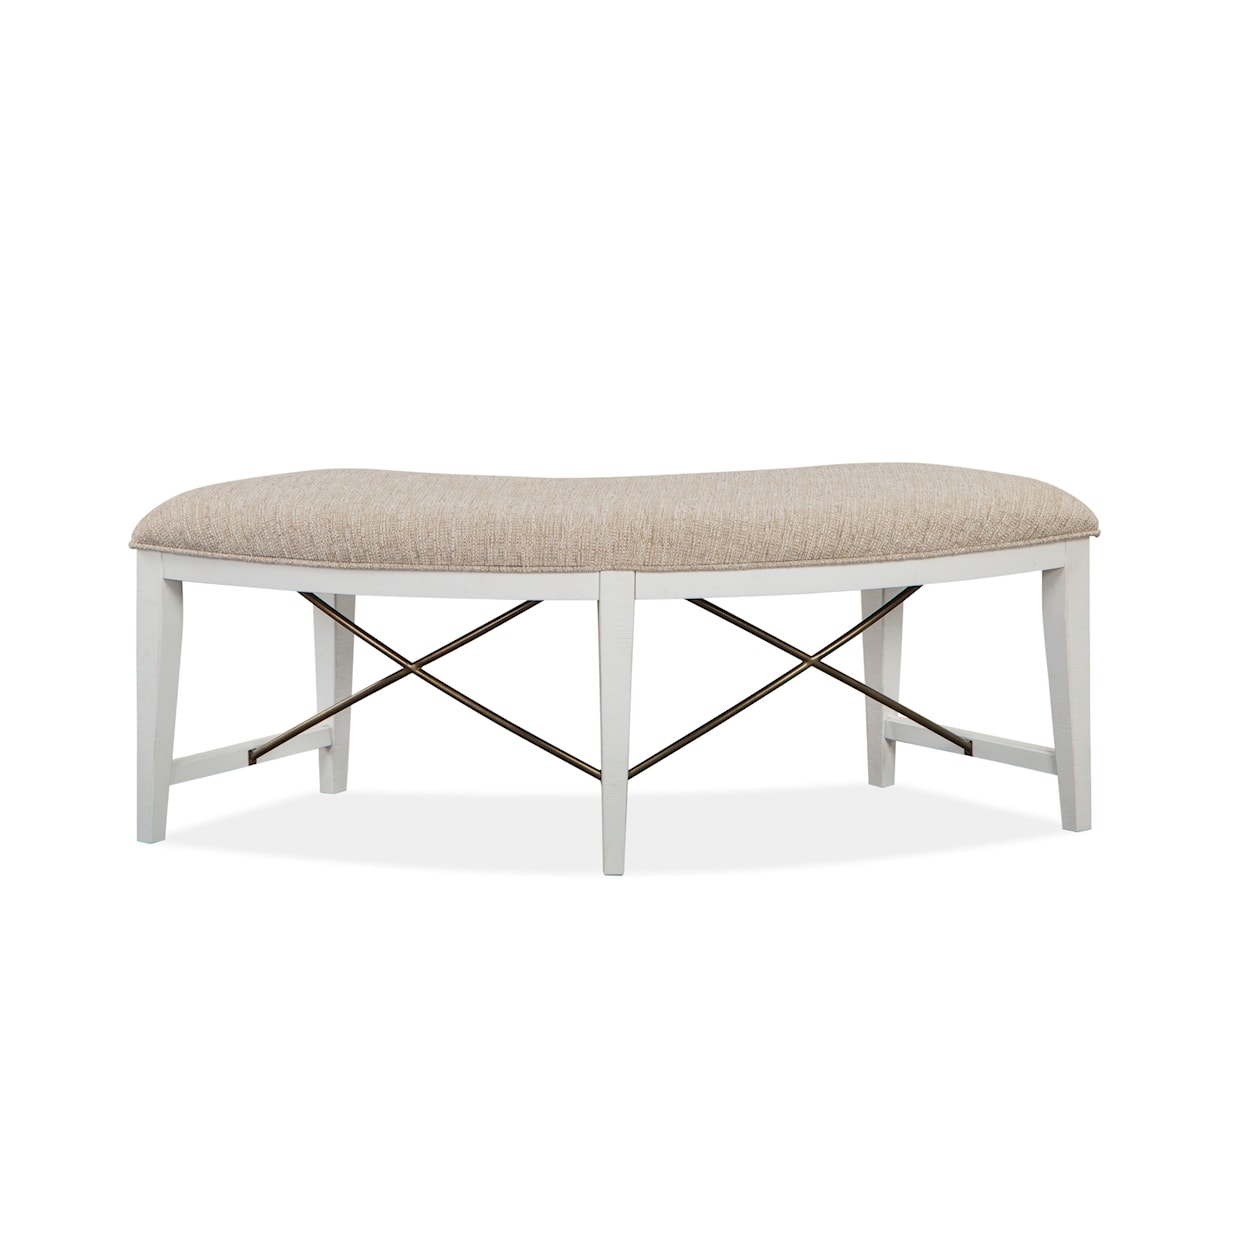 Magnussen Home Heron Cove Dining Curved Bench with Upholstered Seat